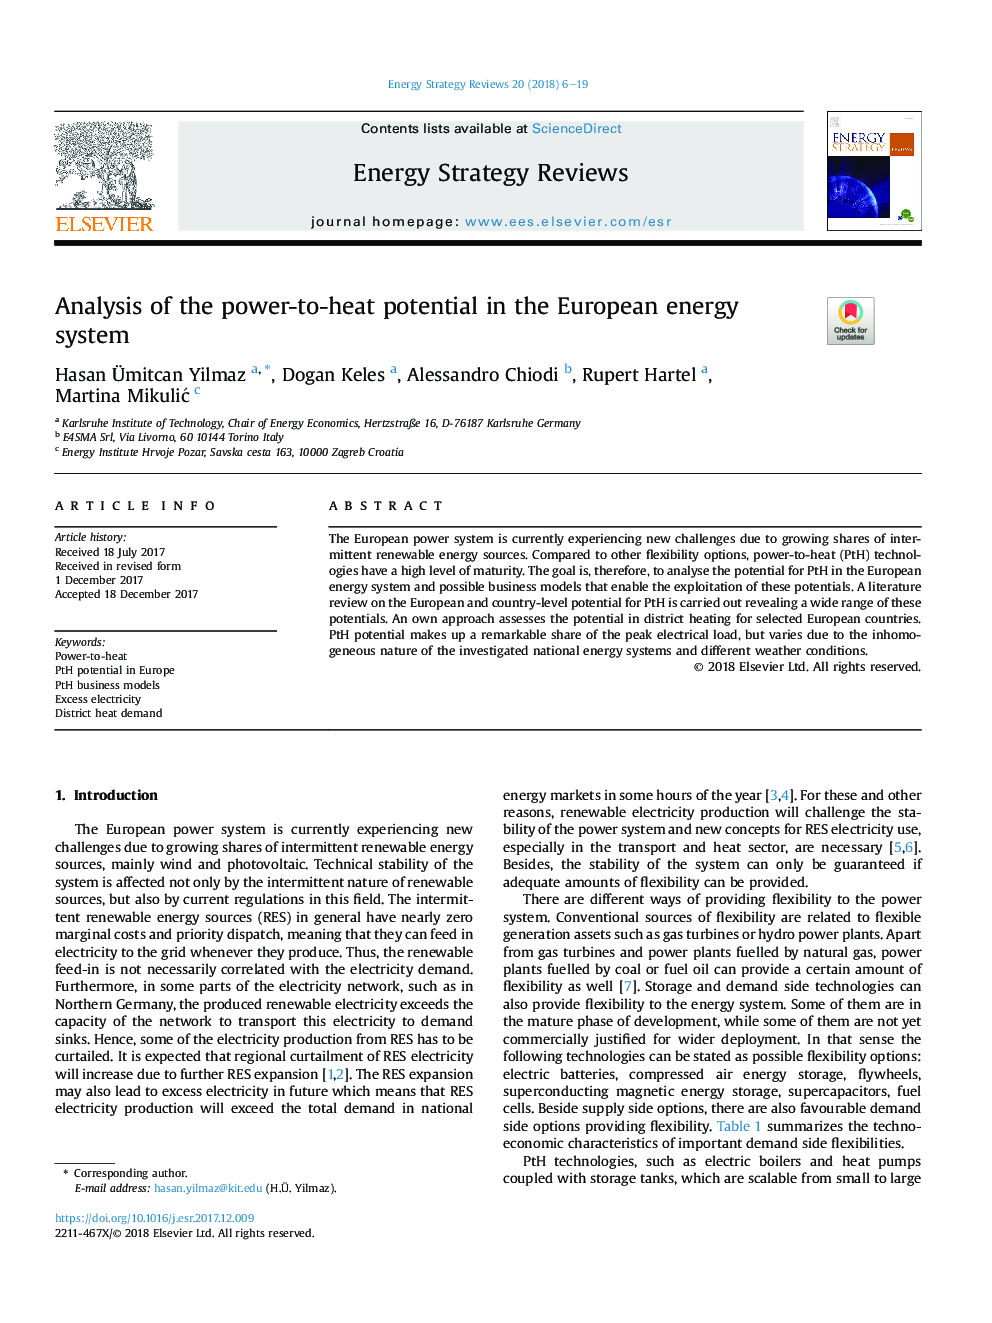 Analysis of the power-to-heat potential in the European energy system